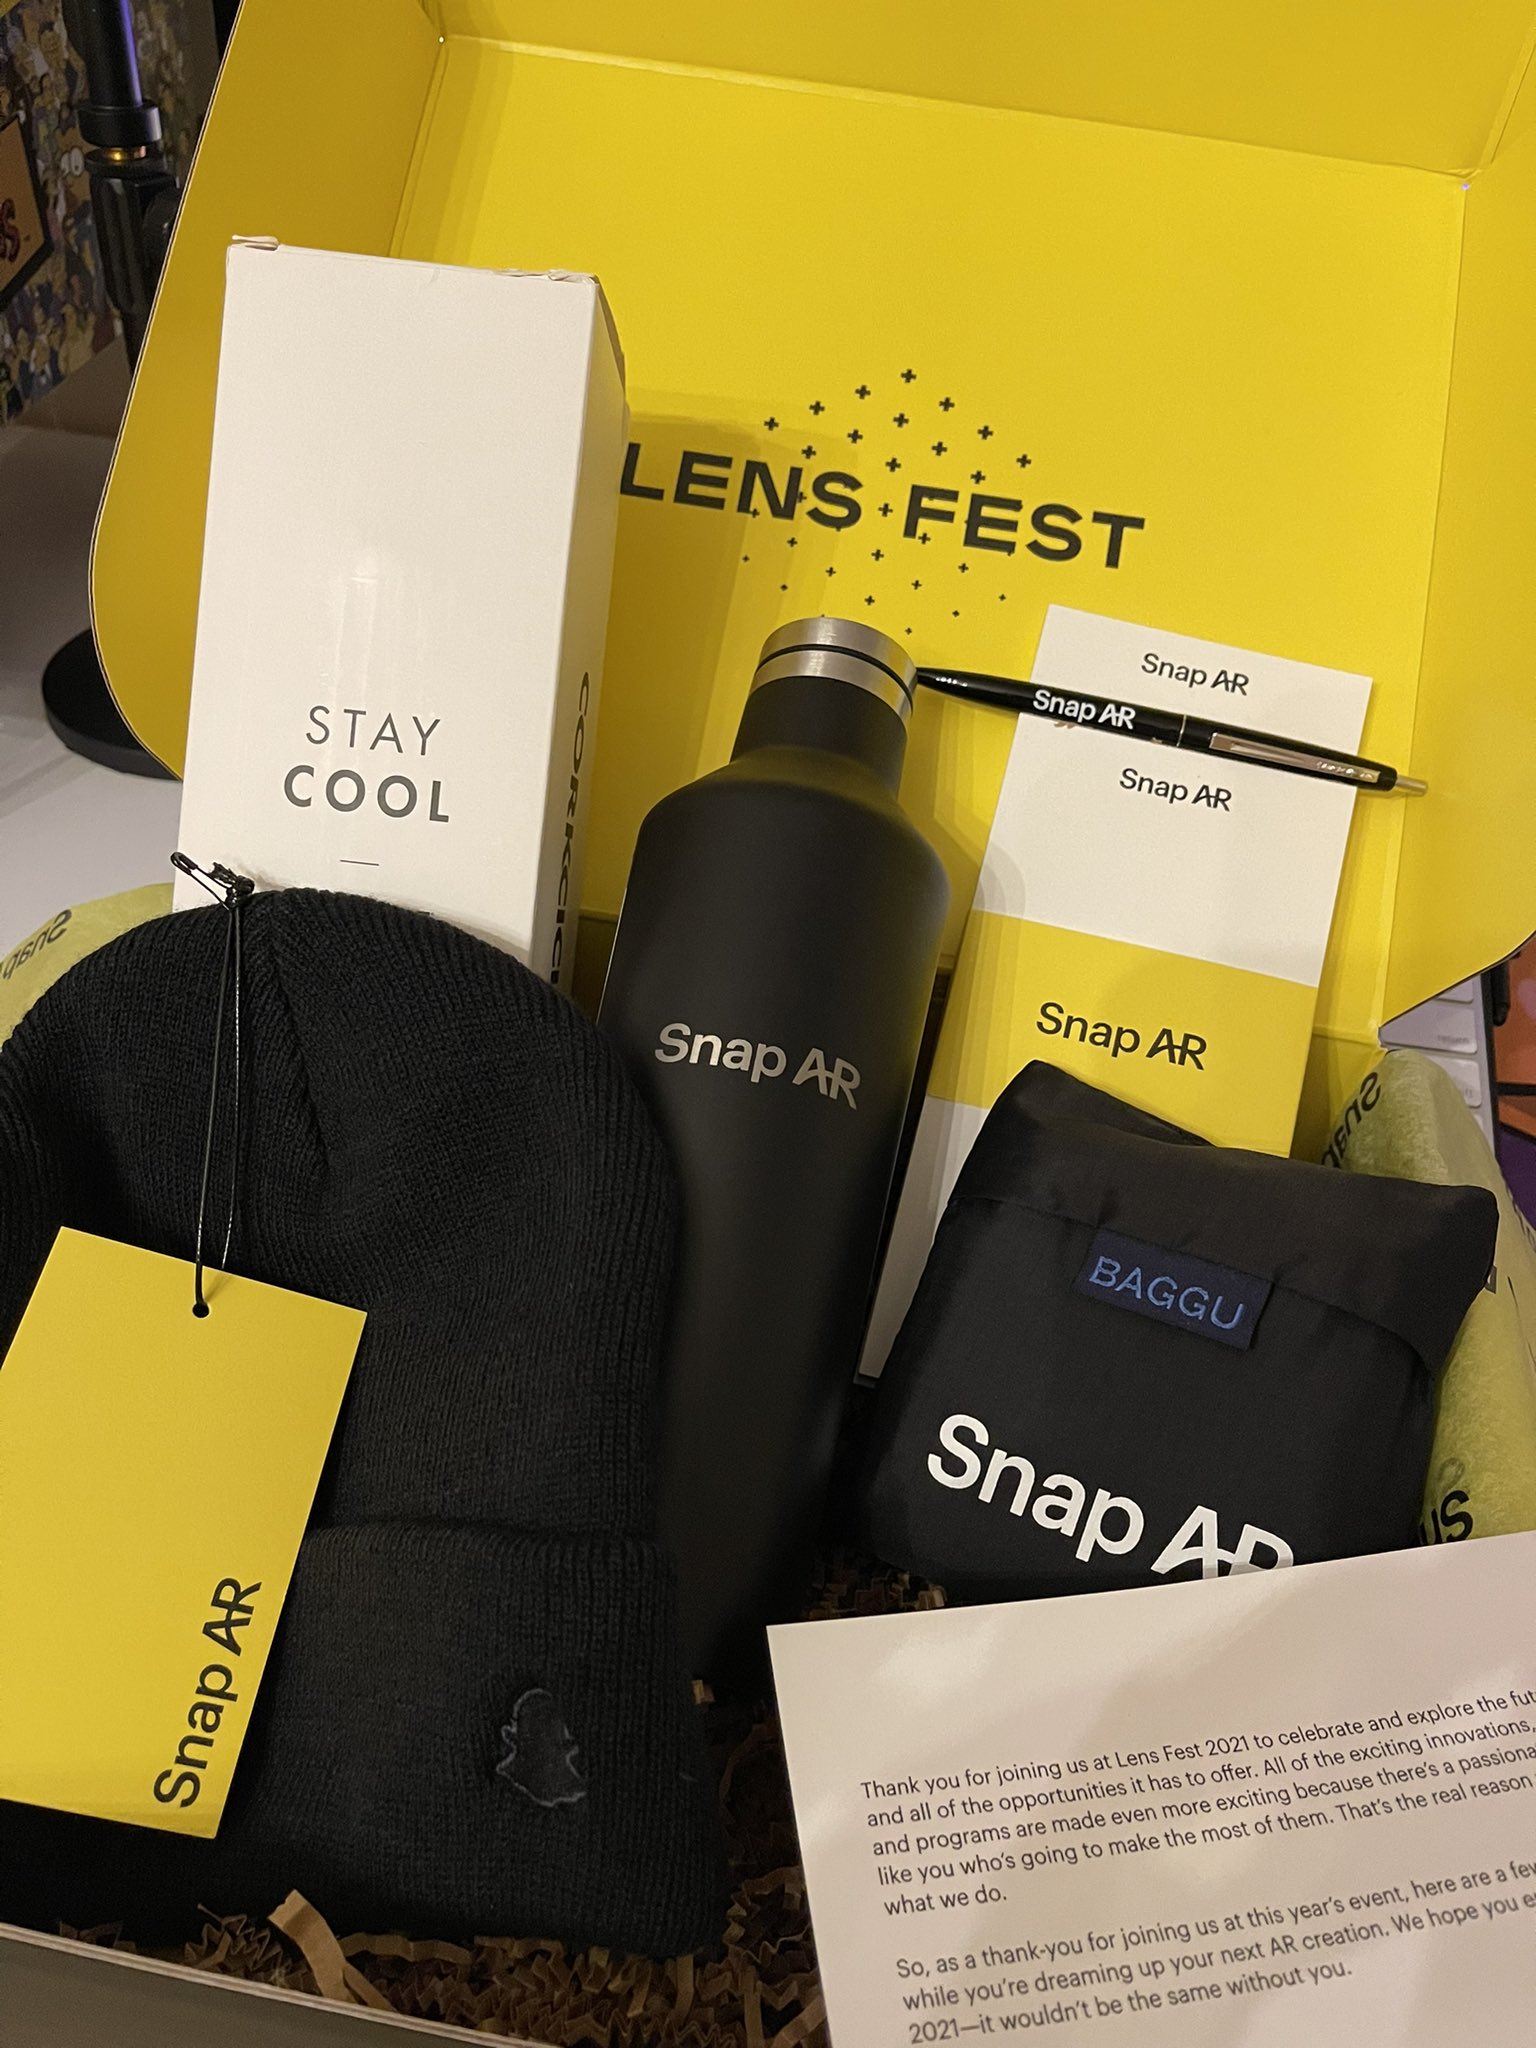 Centrum tønde brutalt CyreneQ on Twitter: "Snapchat Lens Fest swag has arrived! That means  #Lensfest is around the corner. Can't wait for all the new augmented  reality announcements! https://t.co/asuKBYTl5c" / Twitter